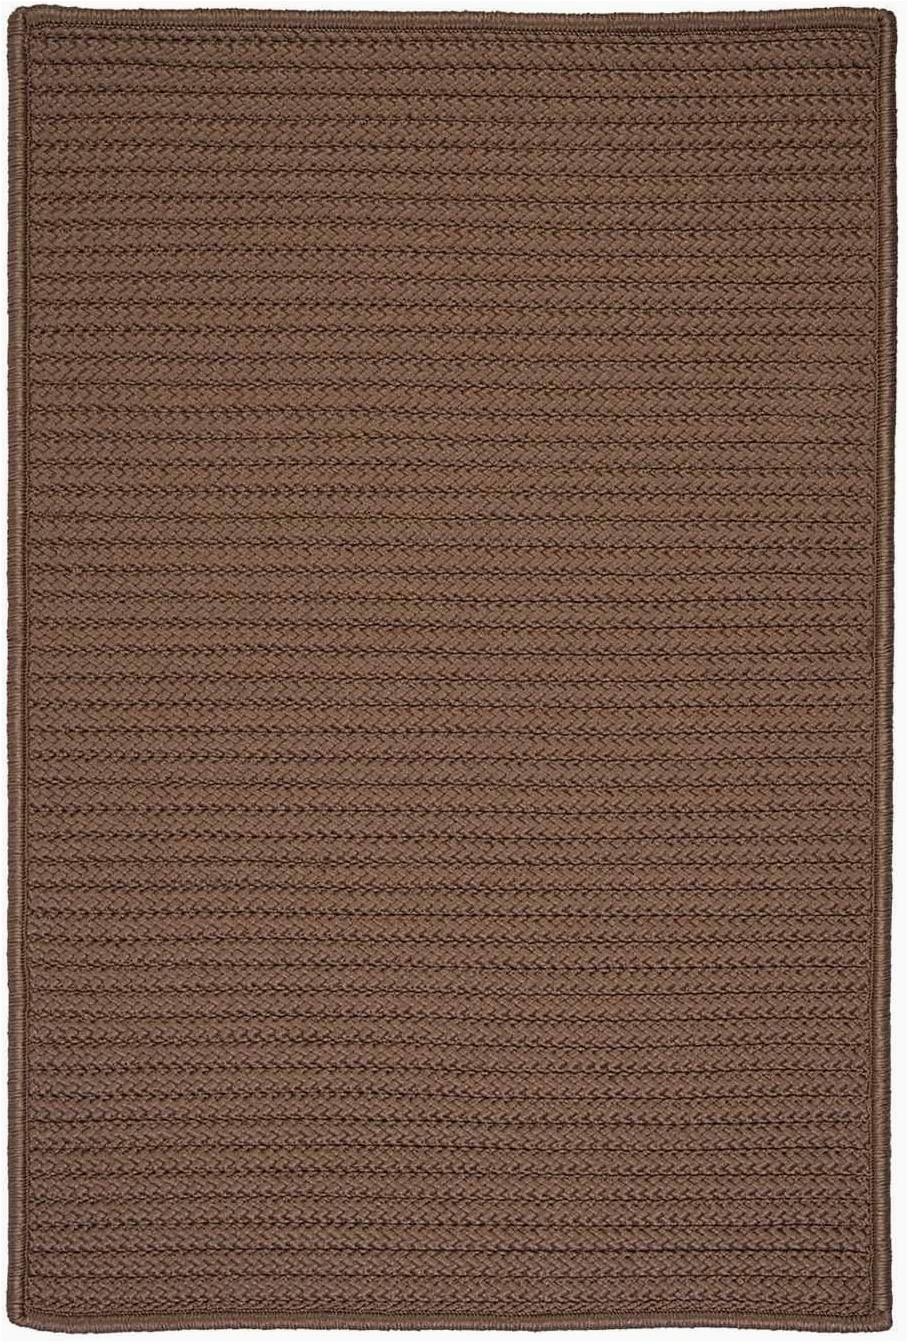 12 X 12 Square area Rug Amazon Colonial Mills Simply Home solid Neutral 12 X 12